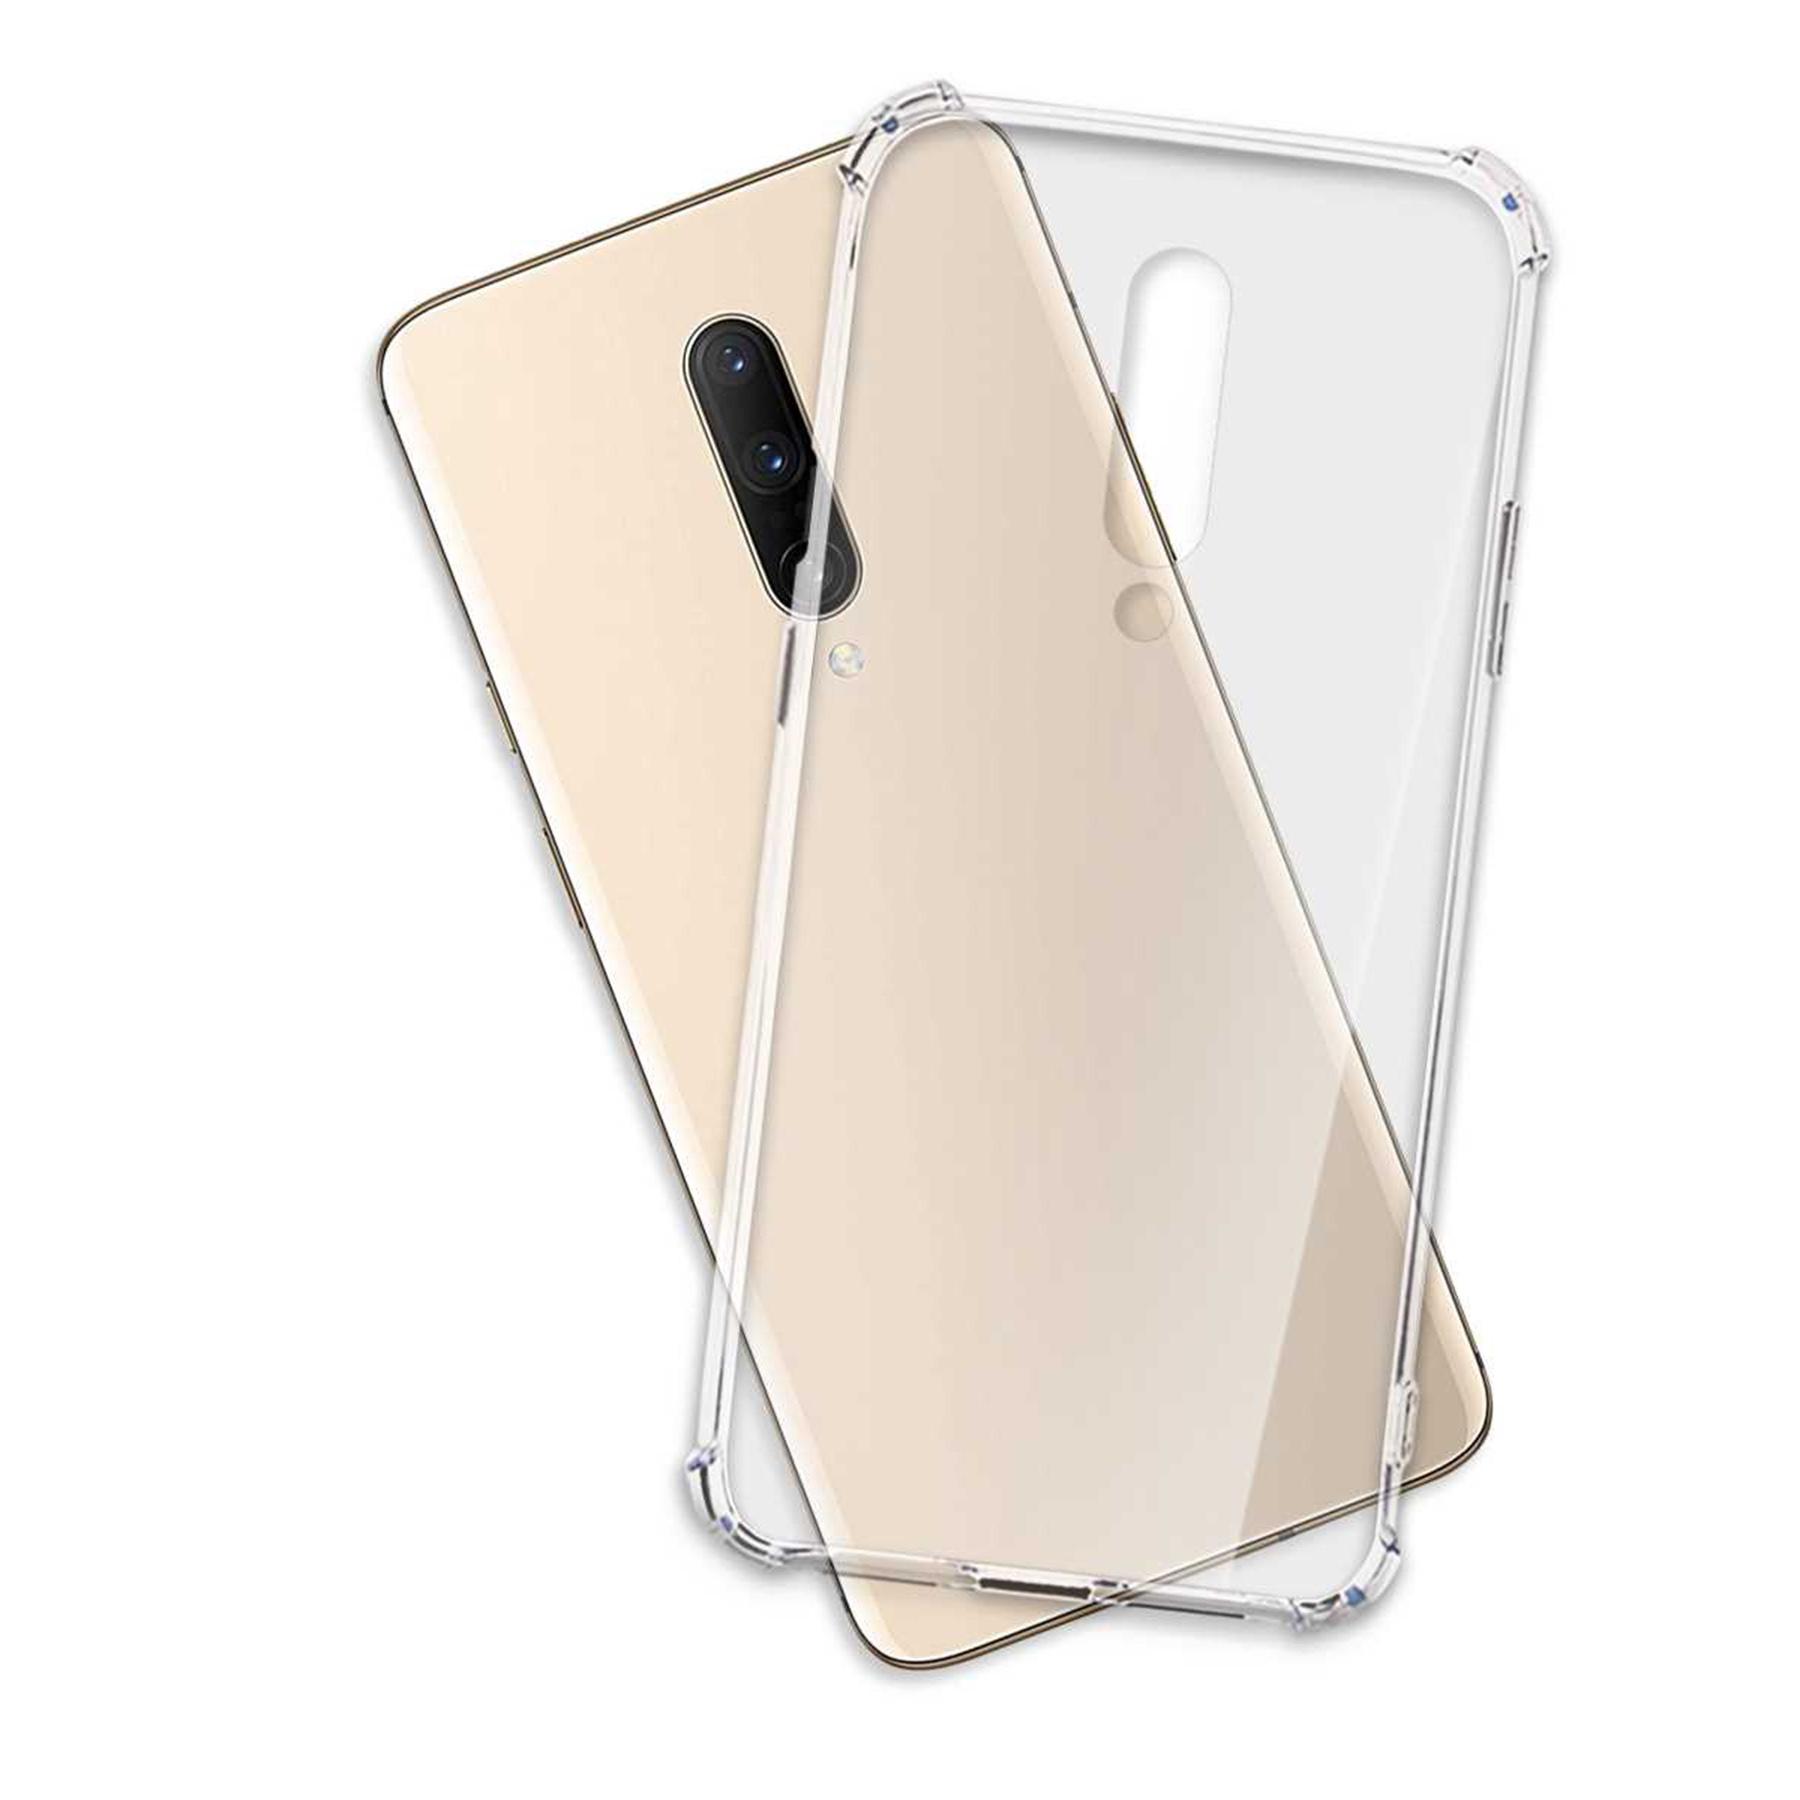 Pro, Armor Backcover, Transparent MORE MTB Case, ENERGY Clear 7 OnePlus,